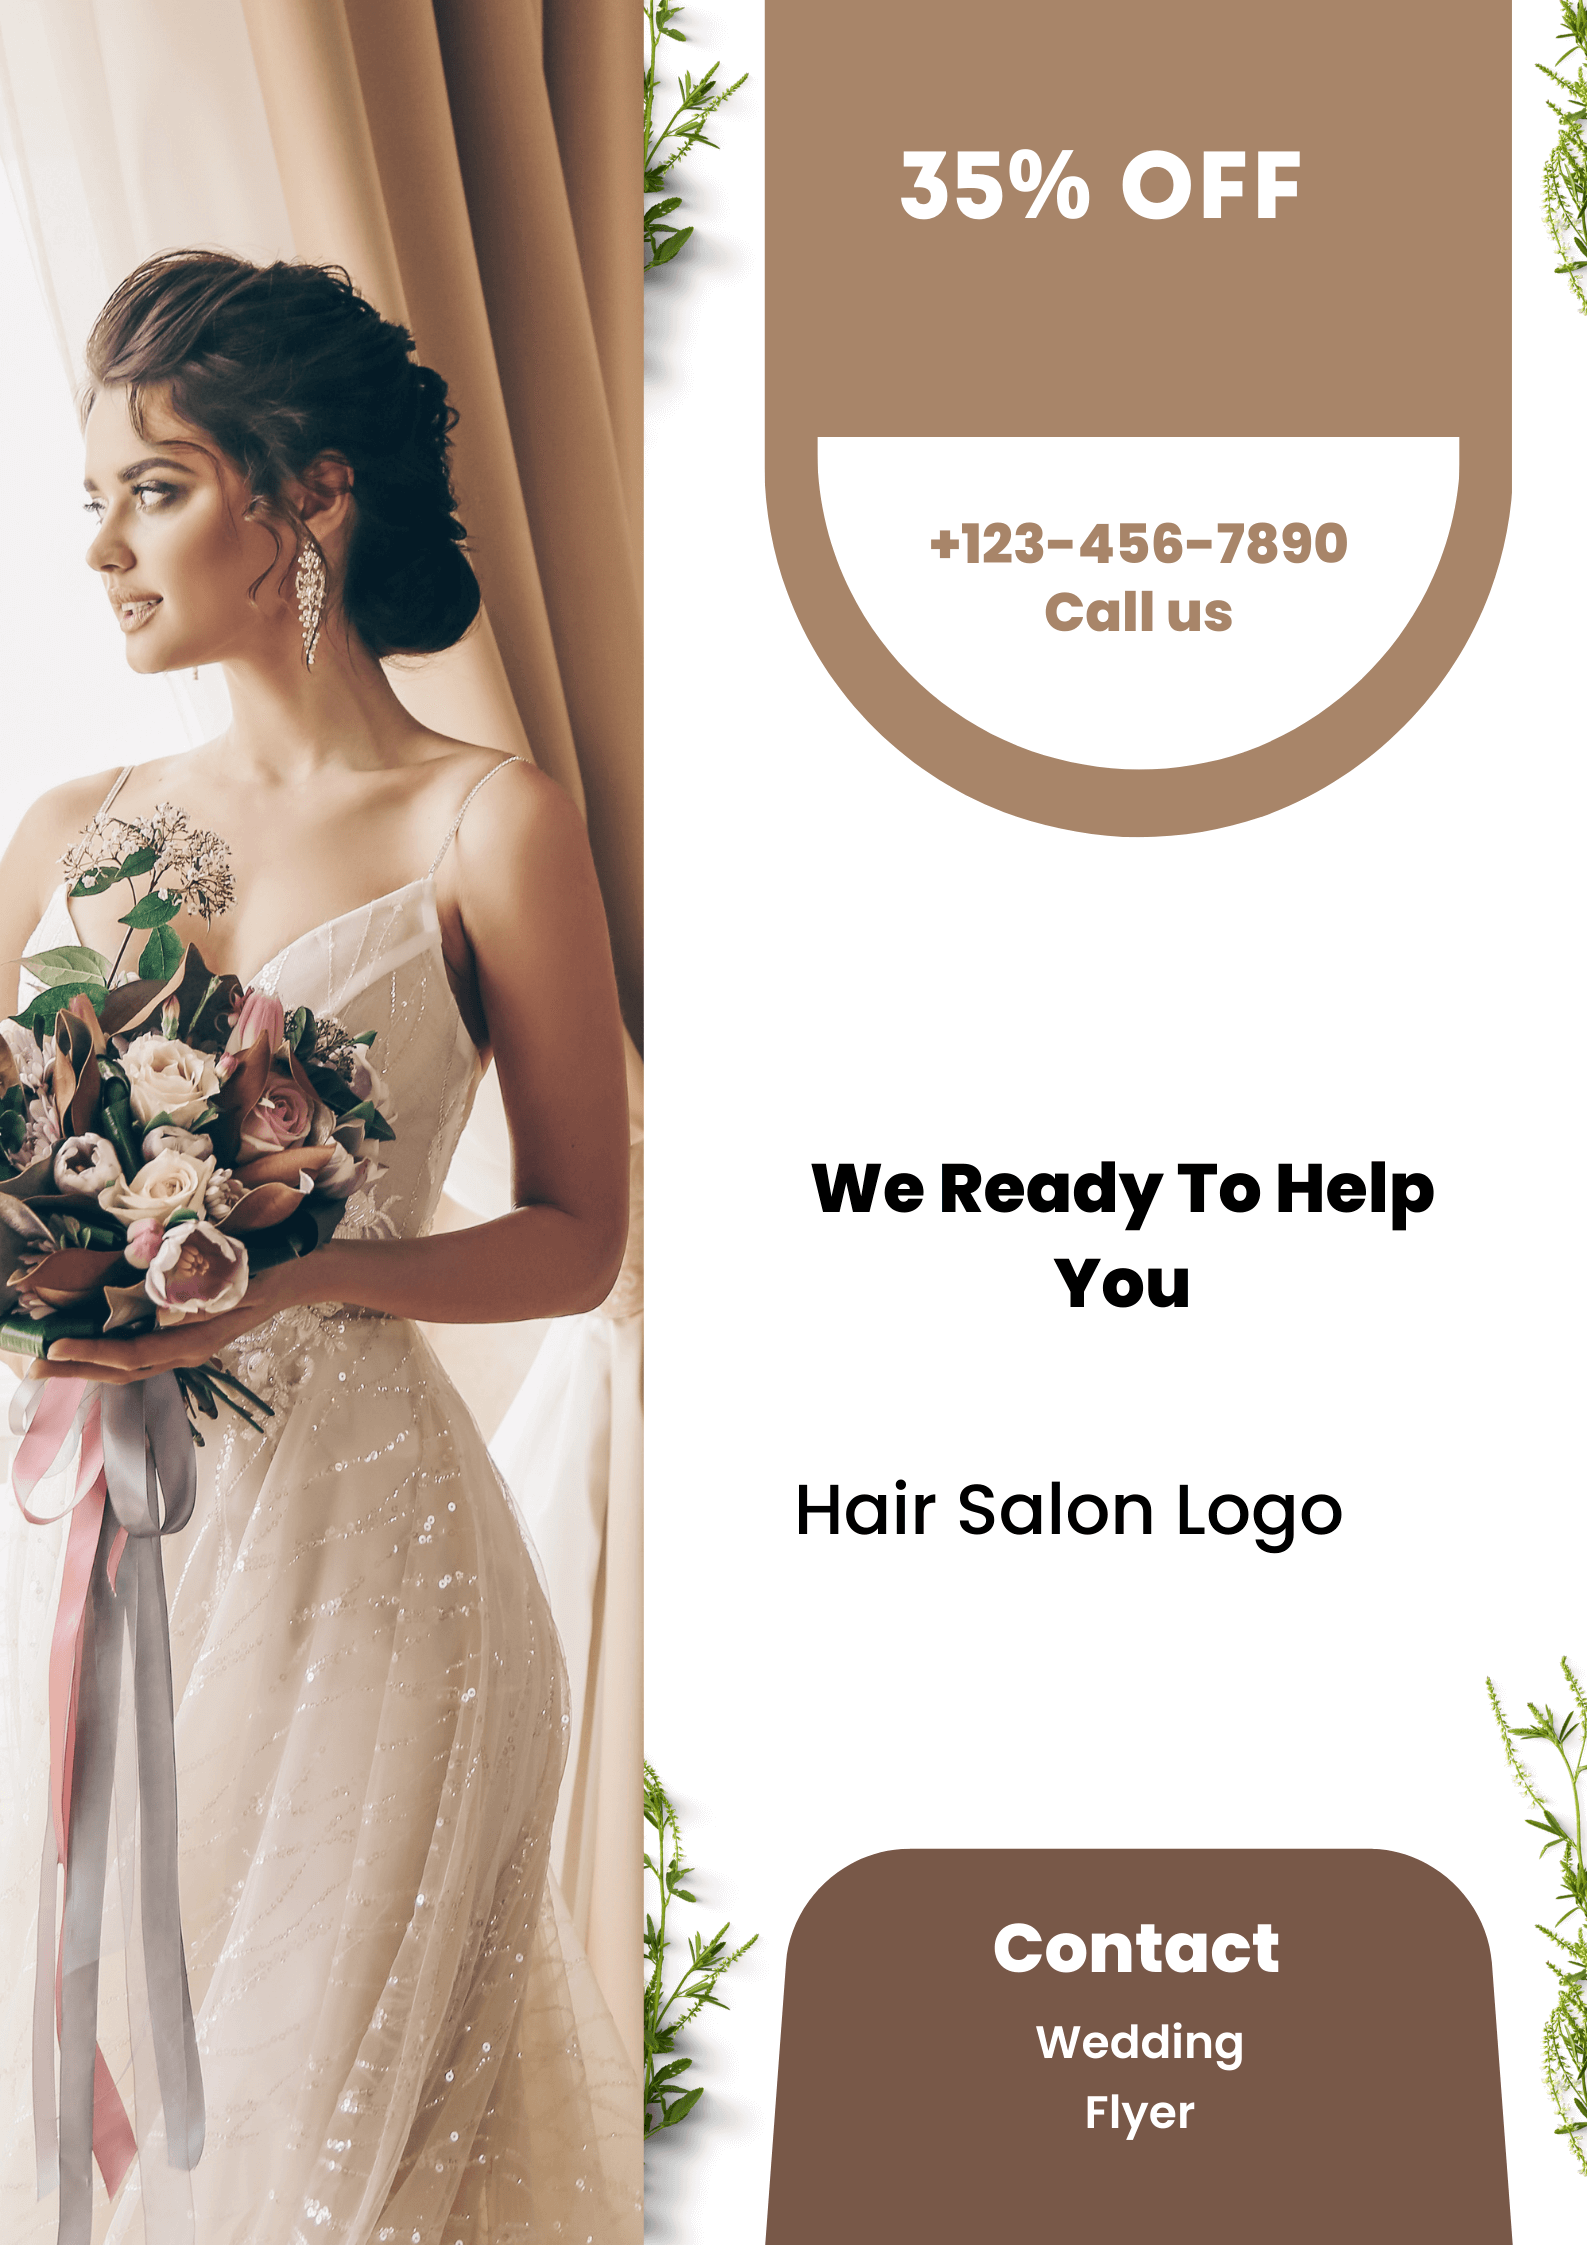 Bridal hairstyling flyer